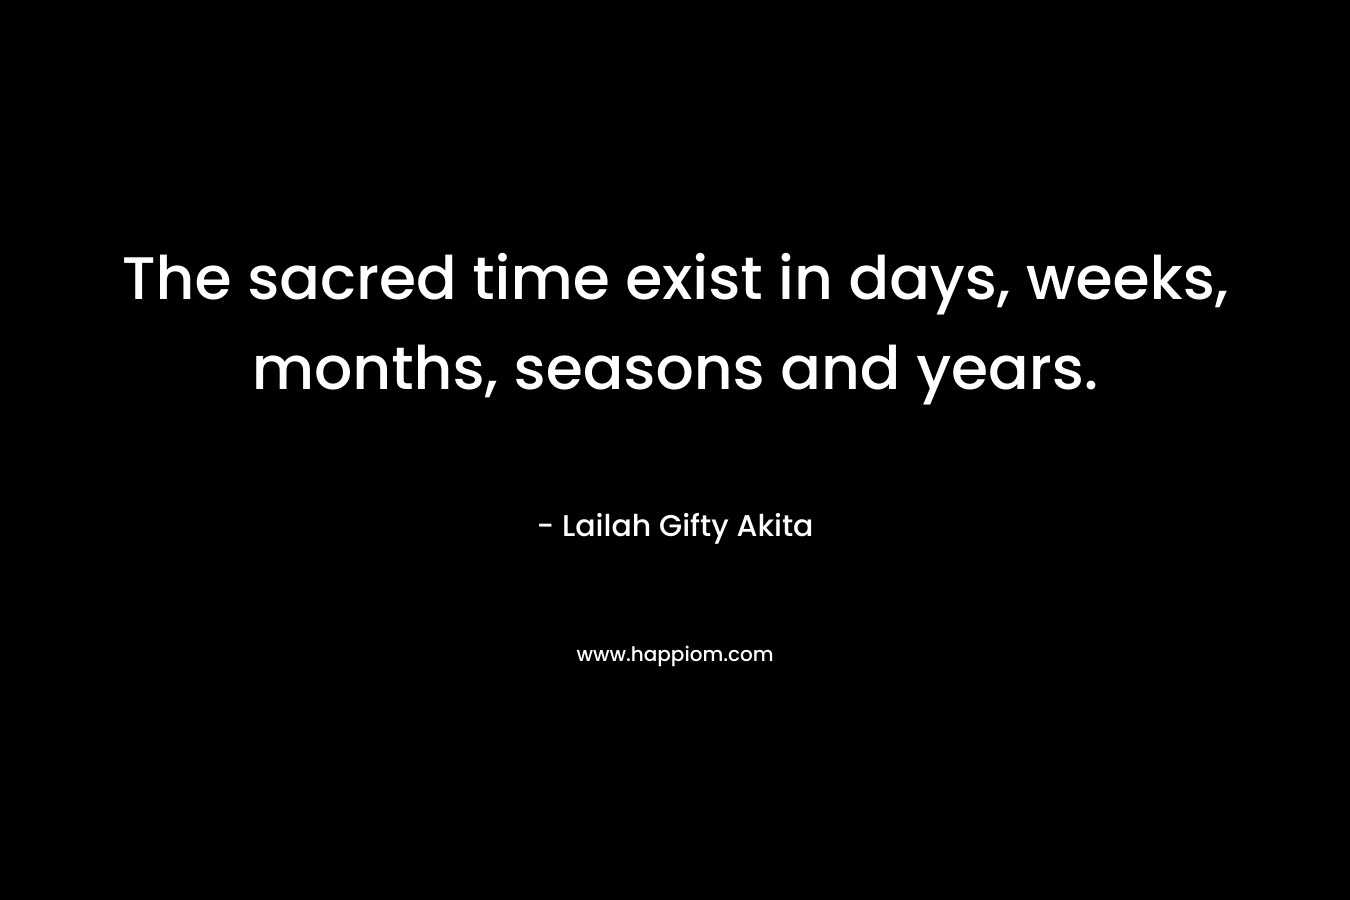 The sacred time exist in days, weeks, months, seasons and years.